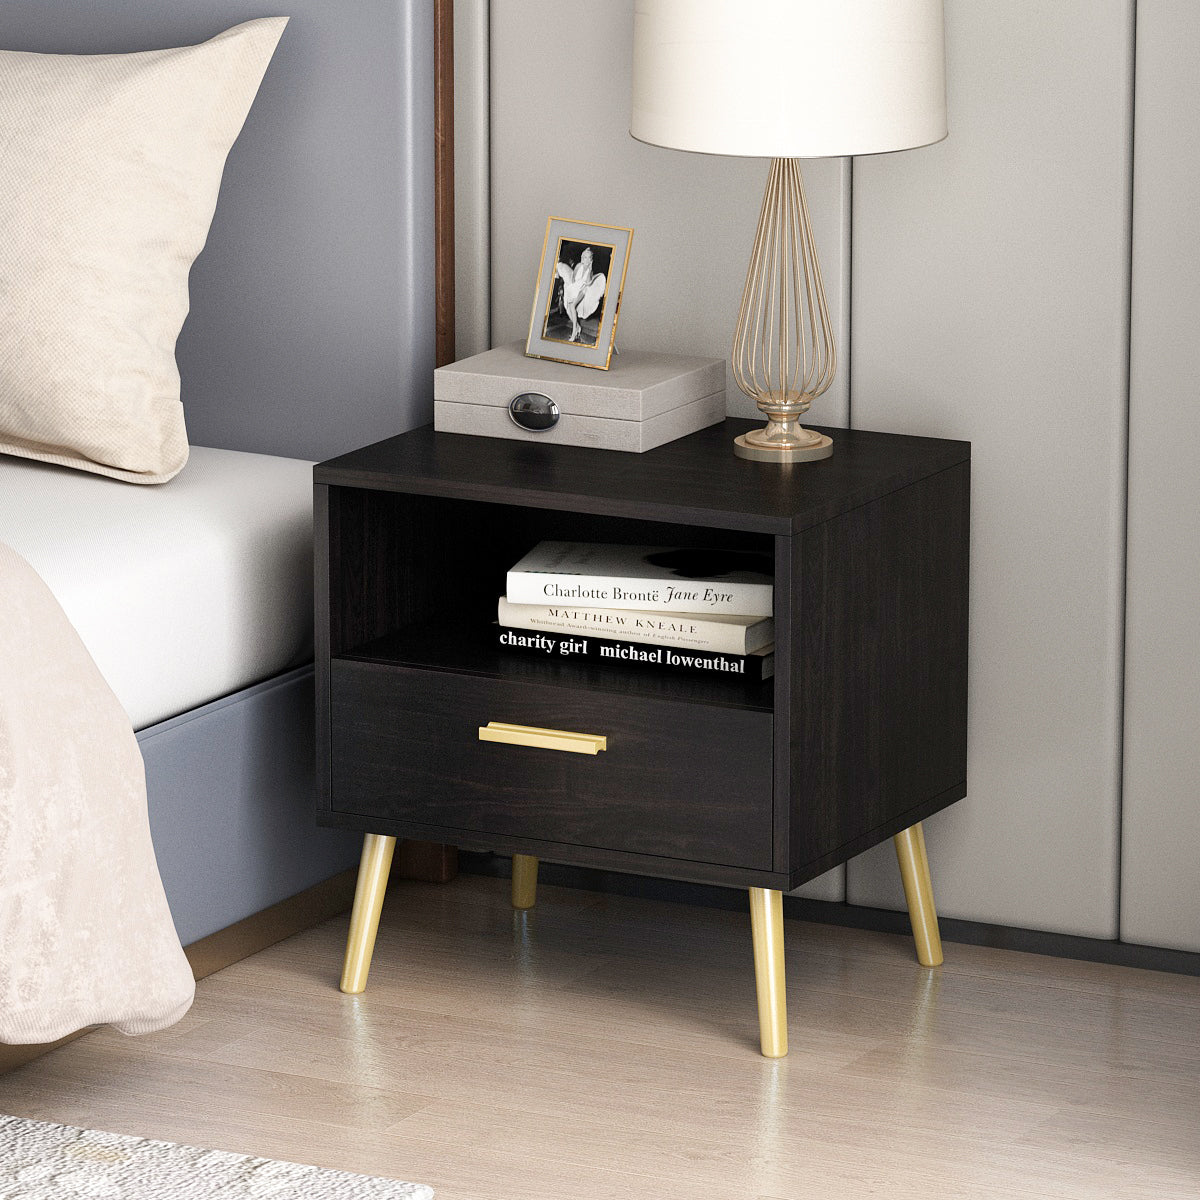 Small Bedside Cabinet 1 Open Shelf and 1 Drawer Storage Table Nightstand